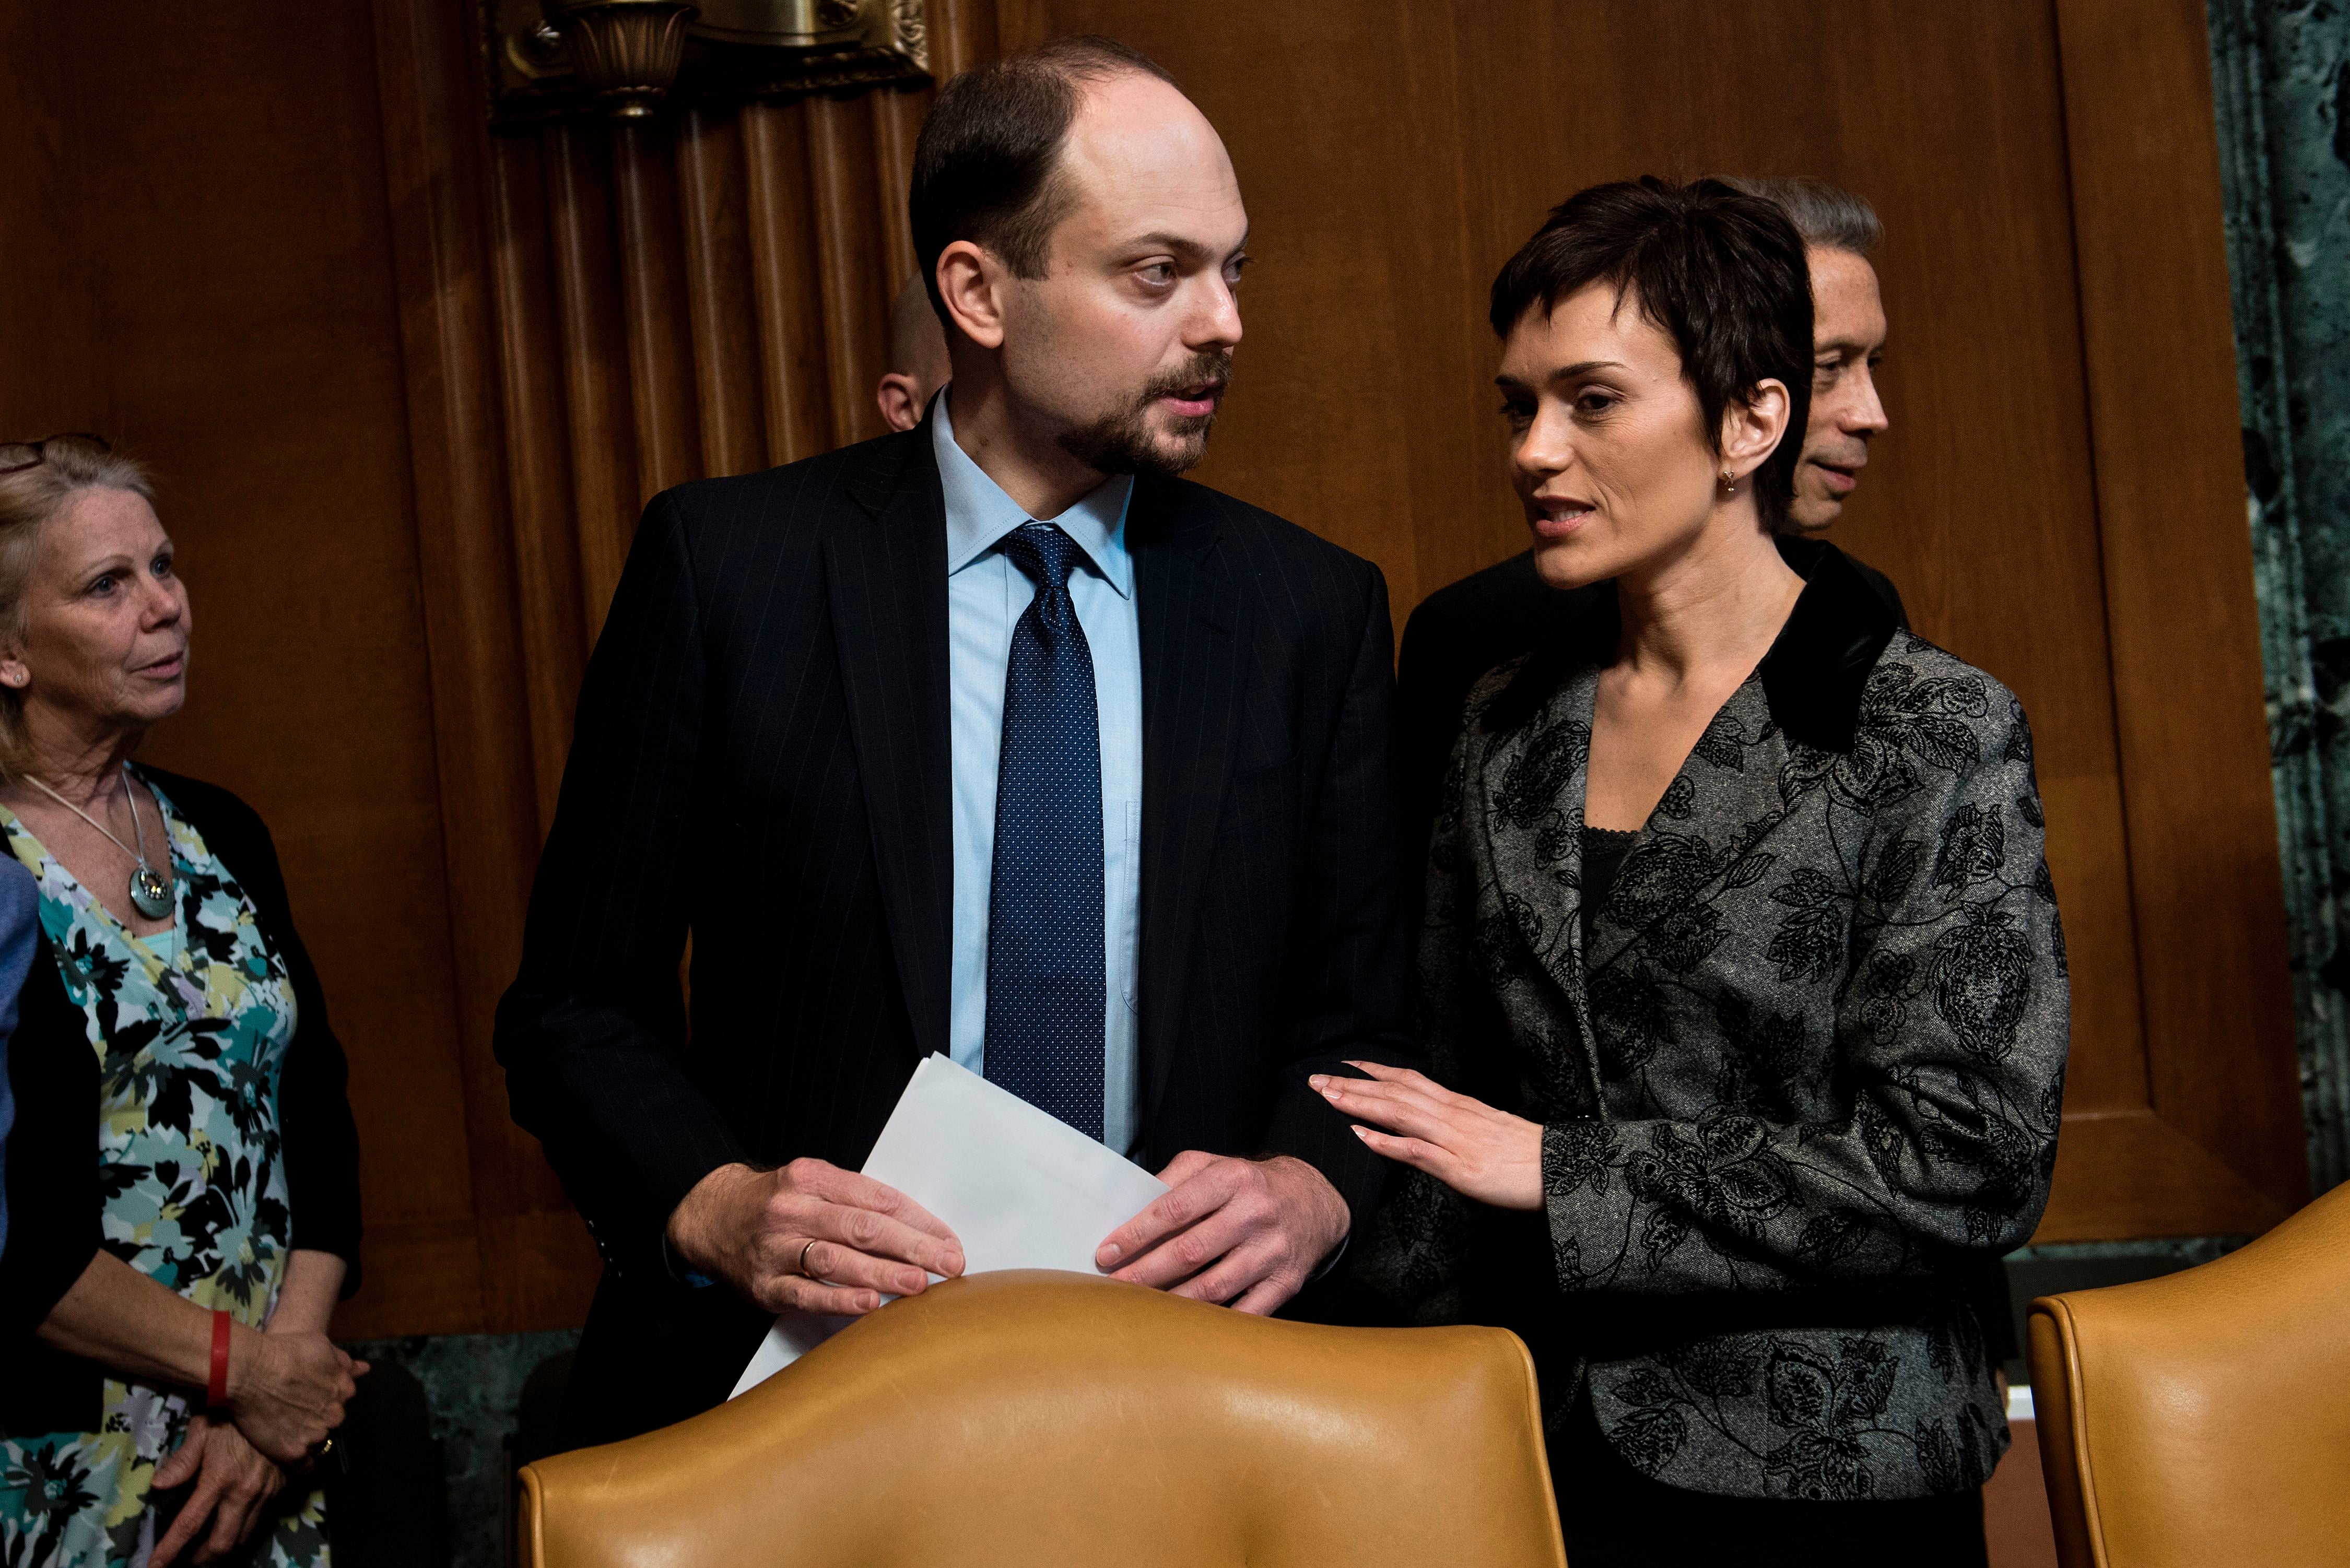 Vladimir Kara-Murza arrives with his wife Yevgenia for a US Senate hearing on Capitol Hill, 29 March 2017